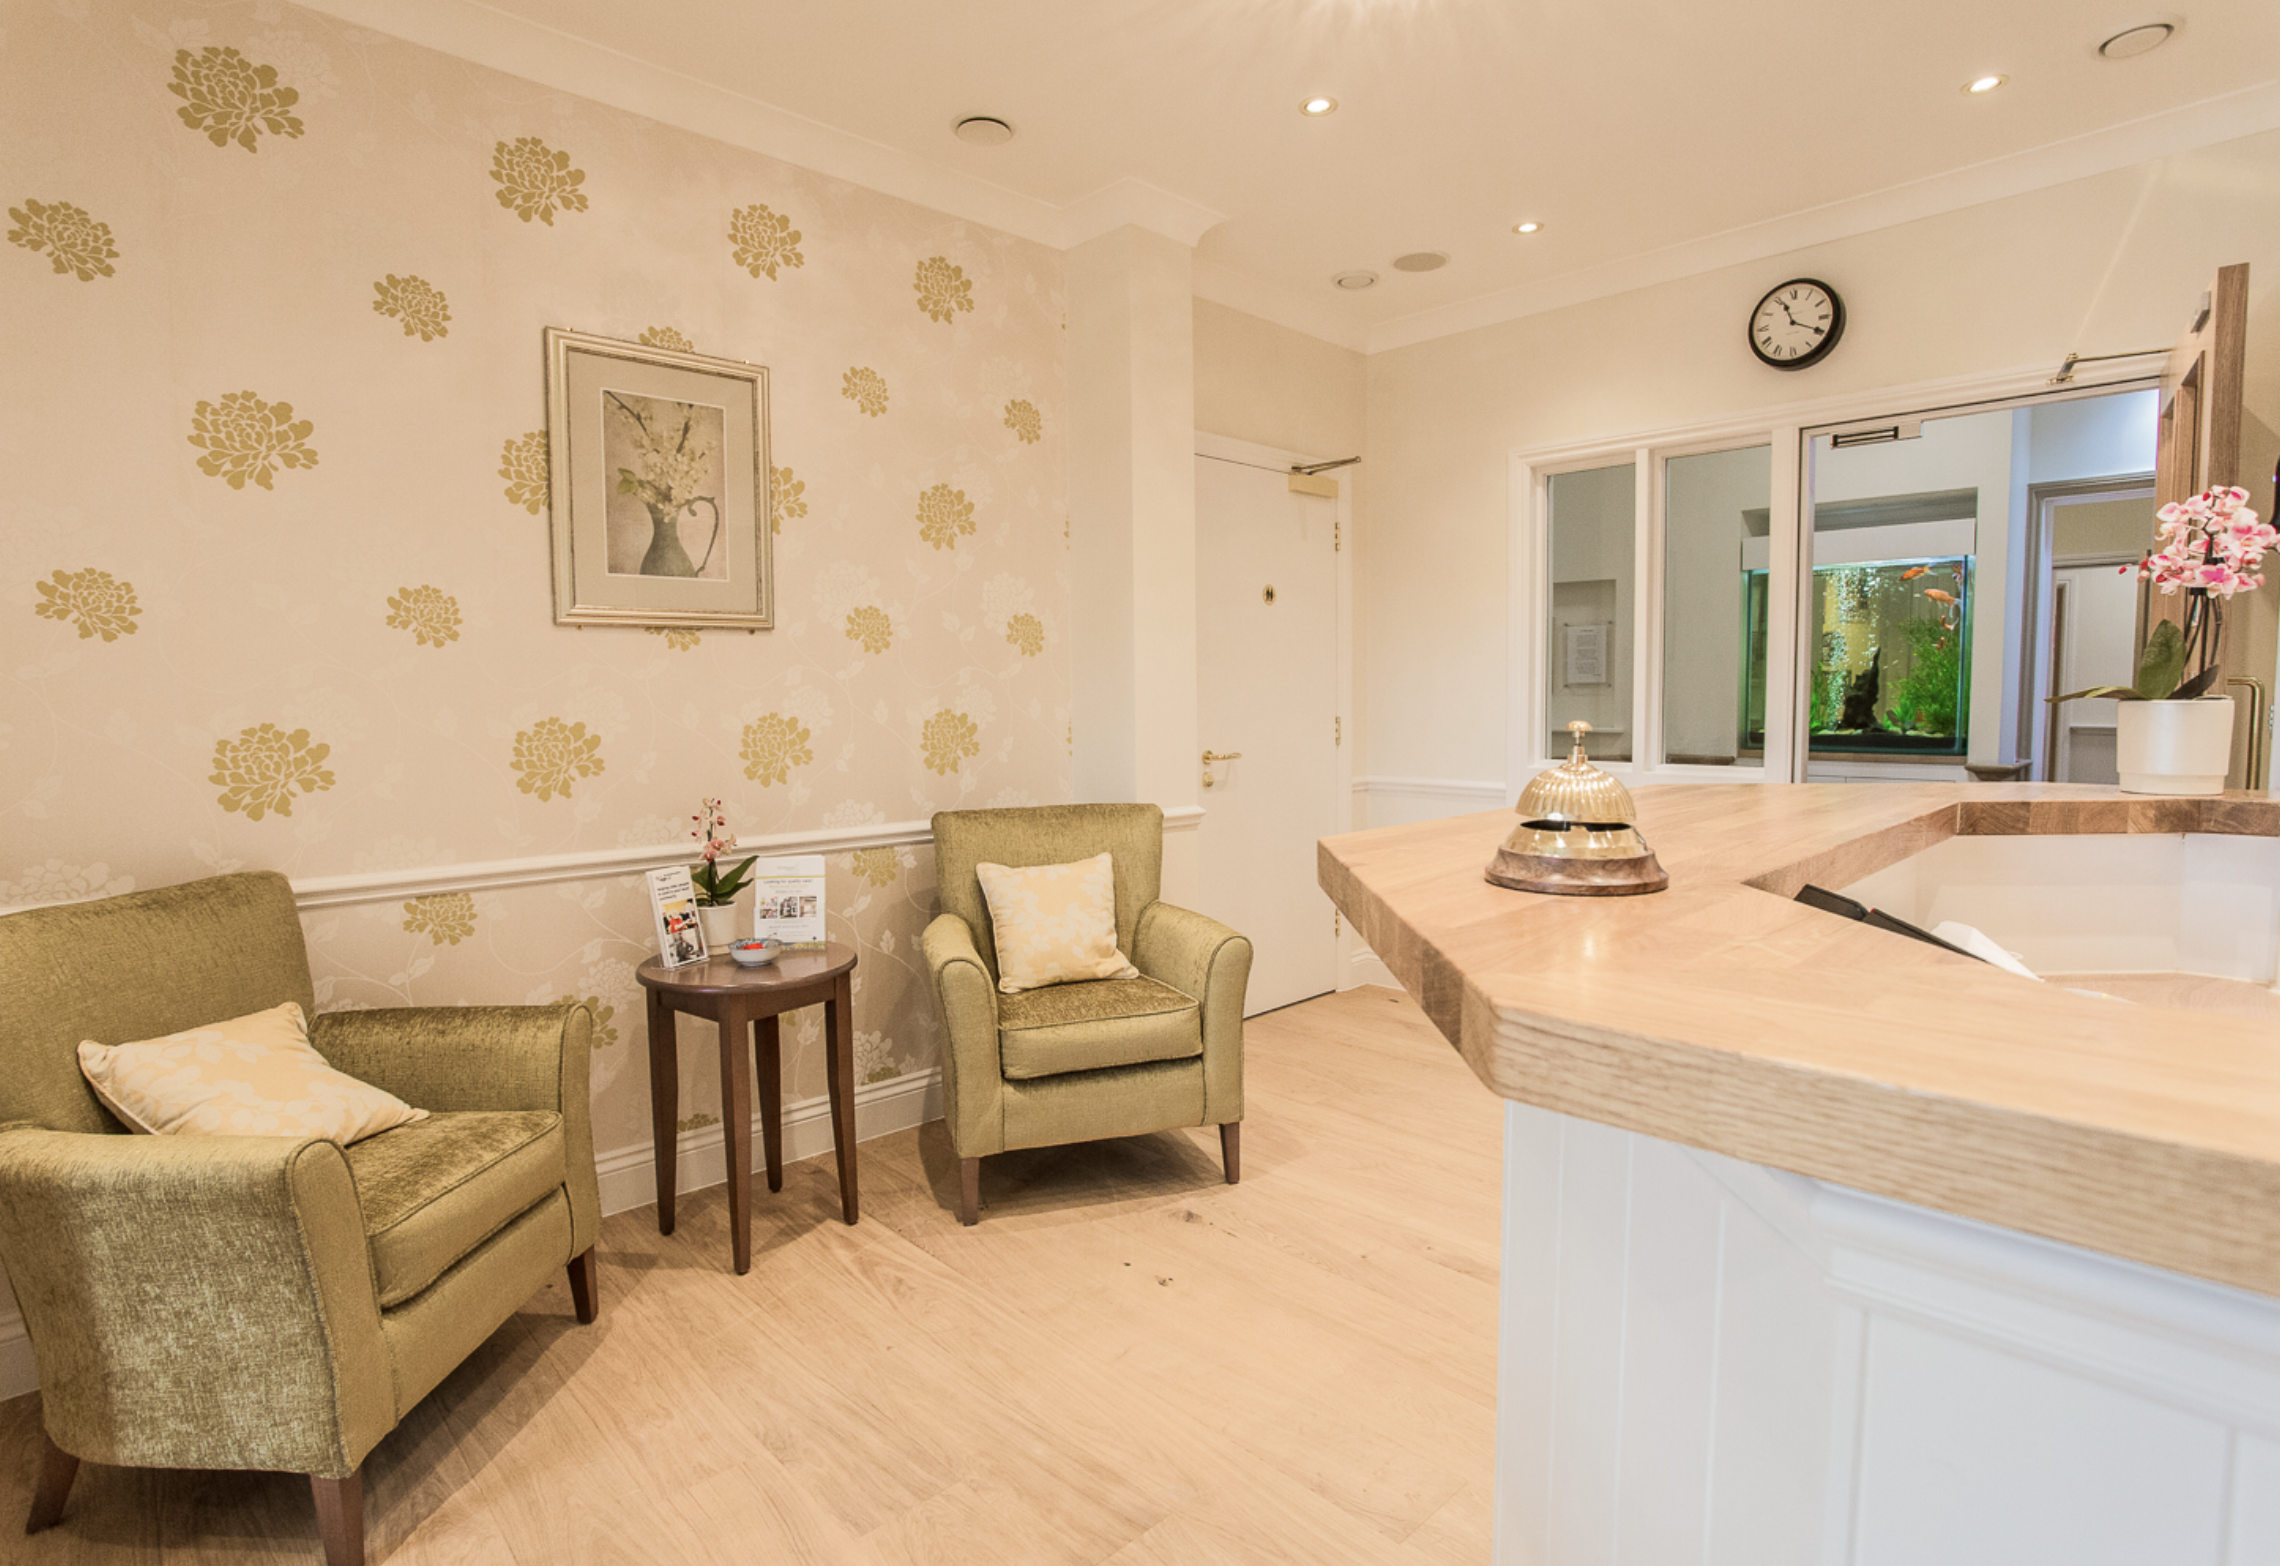 Reception of Byron House care home in Aylesbury, Buckinghamshire